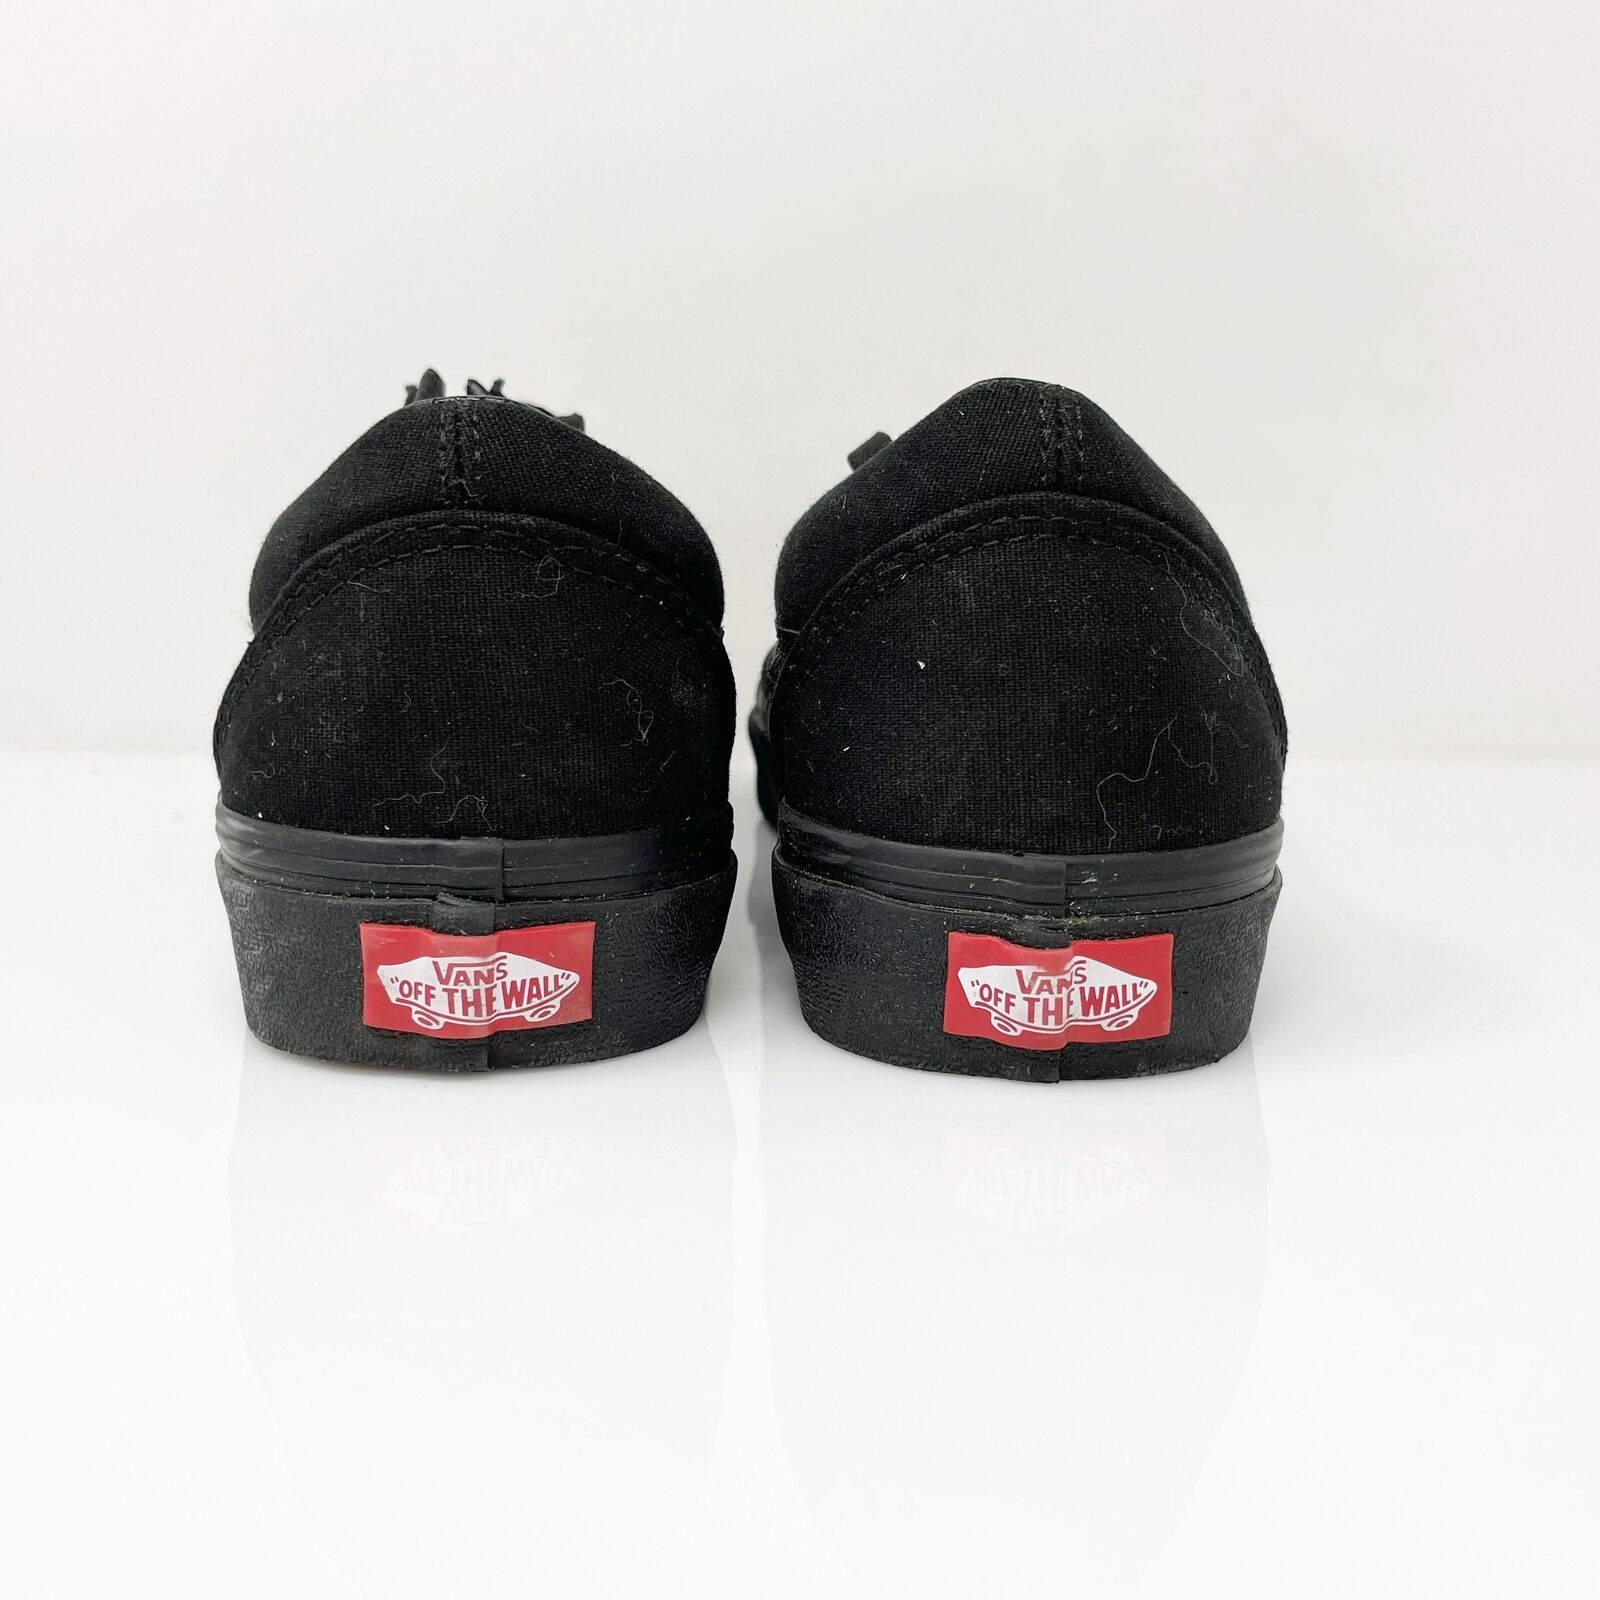 Vans Unisex Off The Wall 507698 Black Casual Shoes Sneakers Size M 7.5 ...